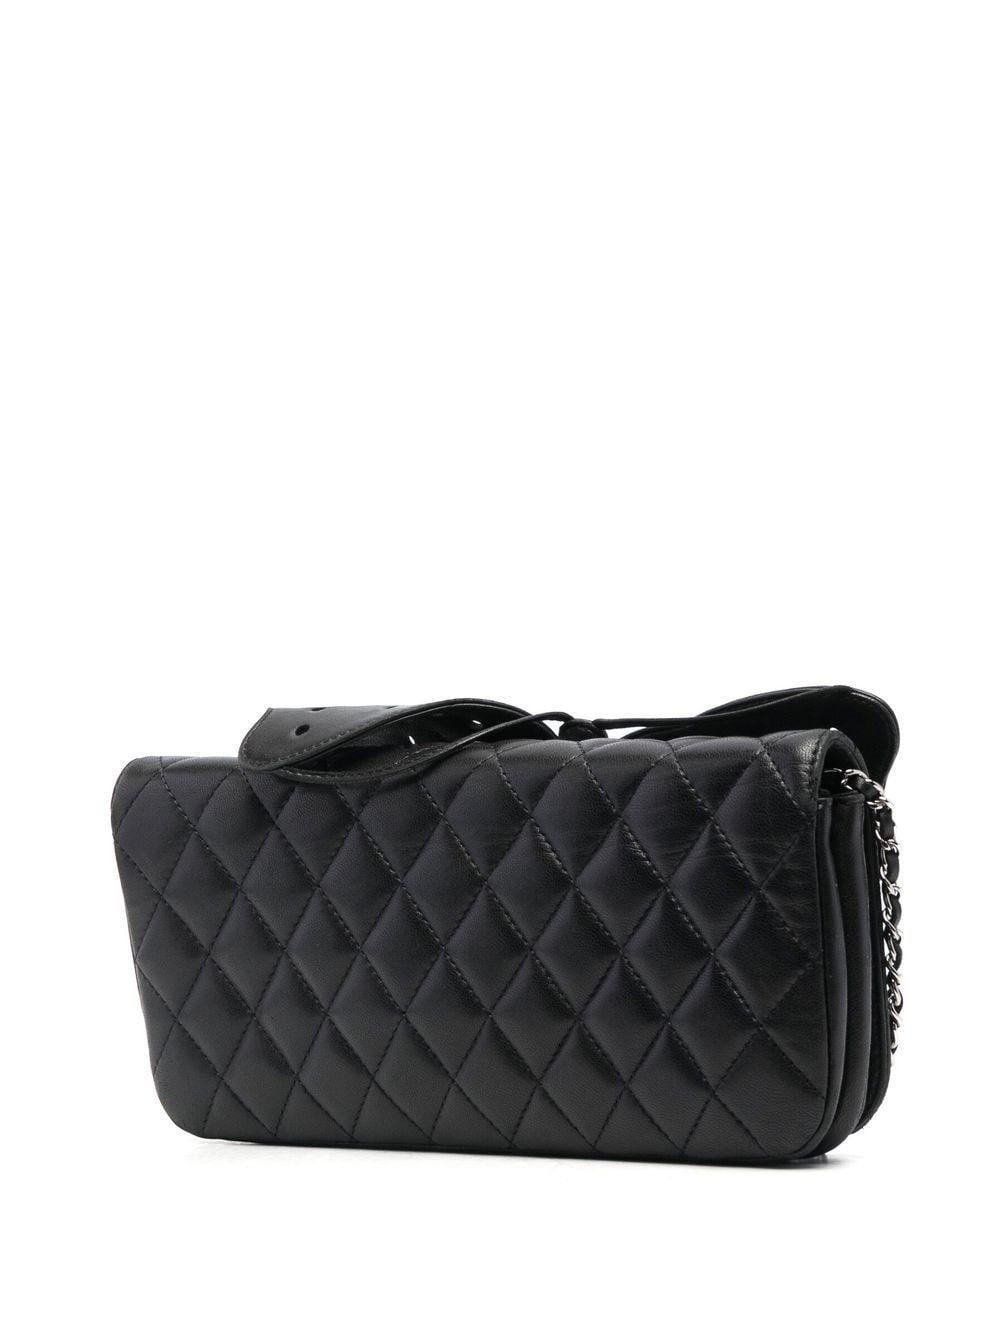 Chanel 2011 Rare Soft Lambskin Black Hand Slide Butterfly Ornament Clutch Flap For Sale 5